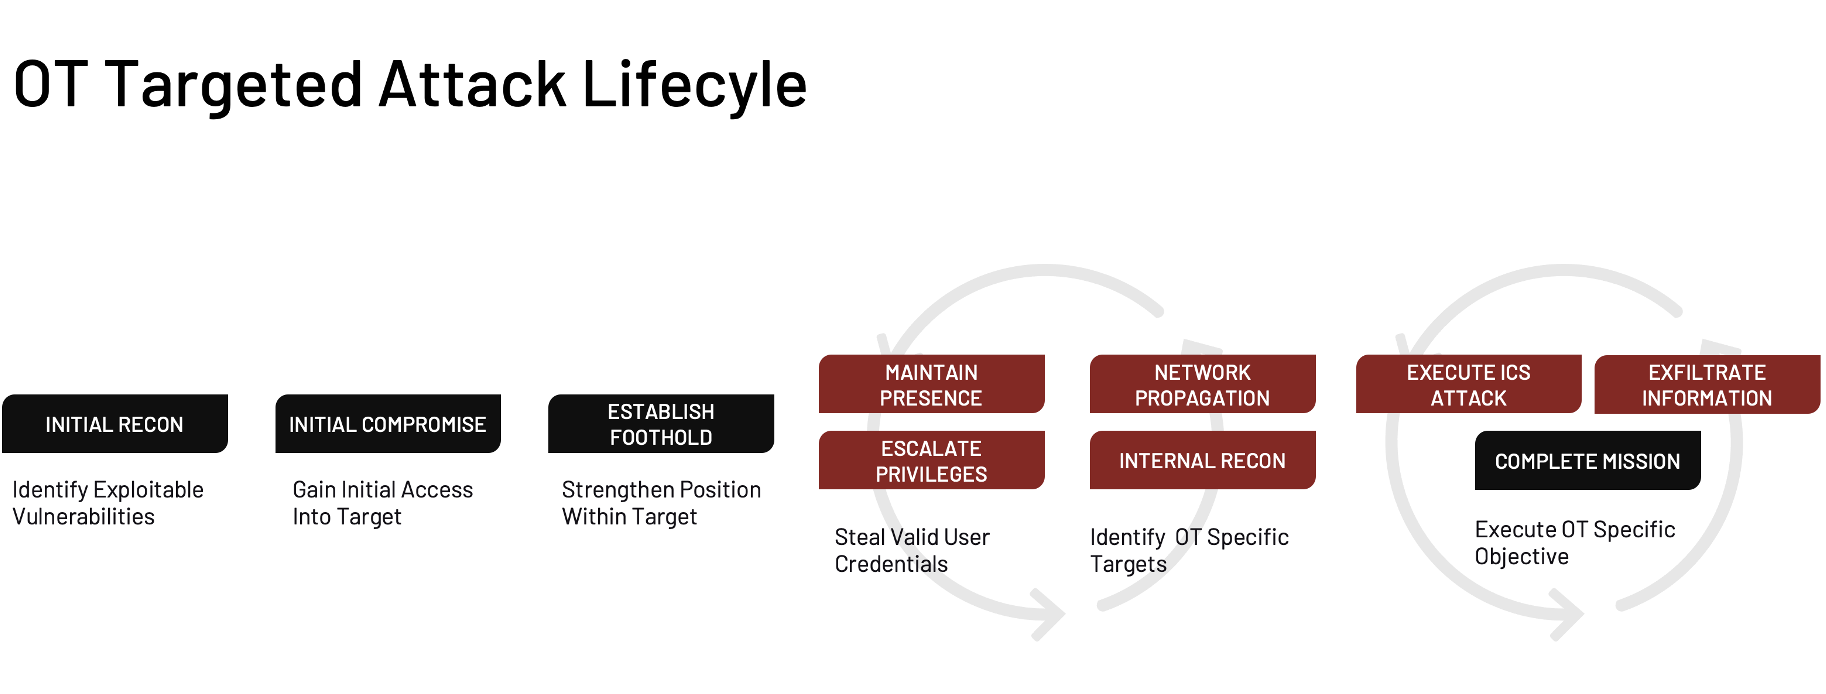 Targeted attack lifecycle for OT 